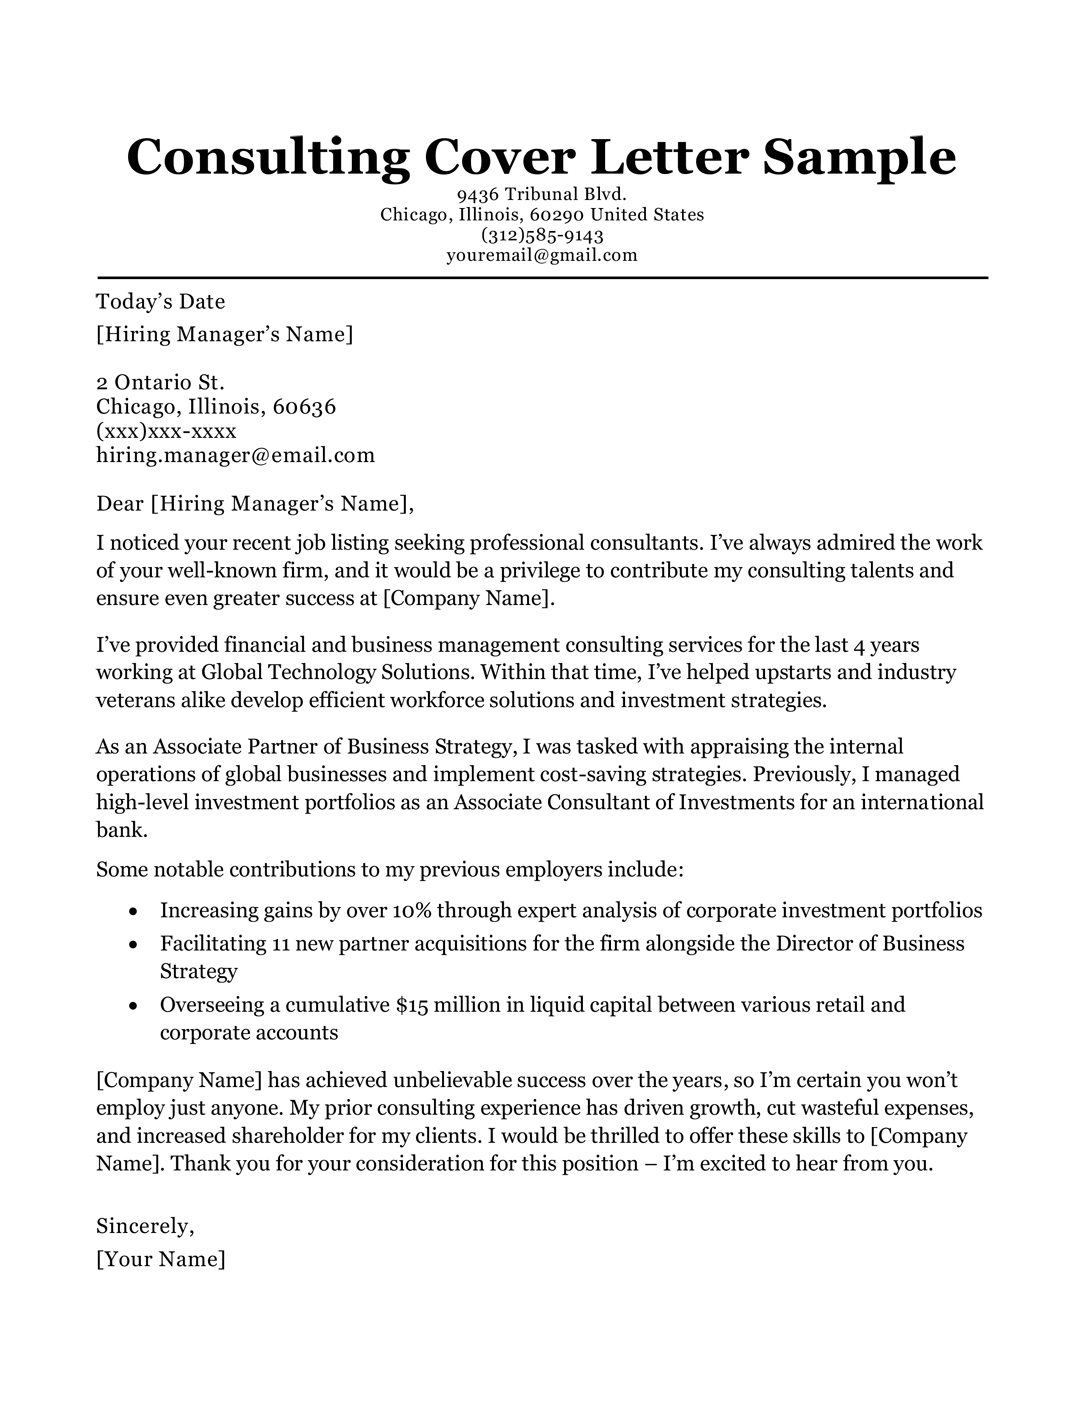 Consulting Cover Letter Sample & Writing Tips | Resume Companion